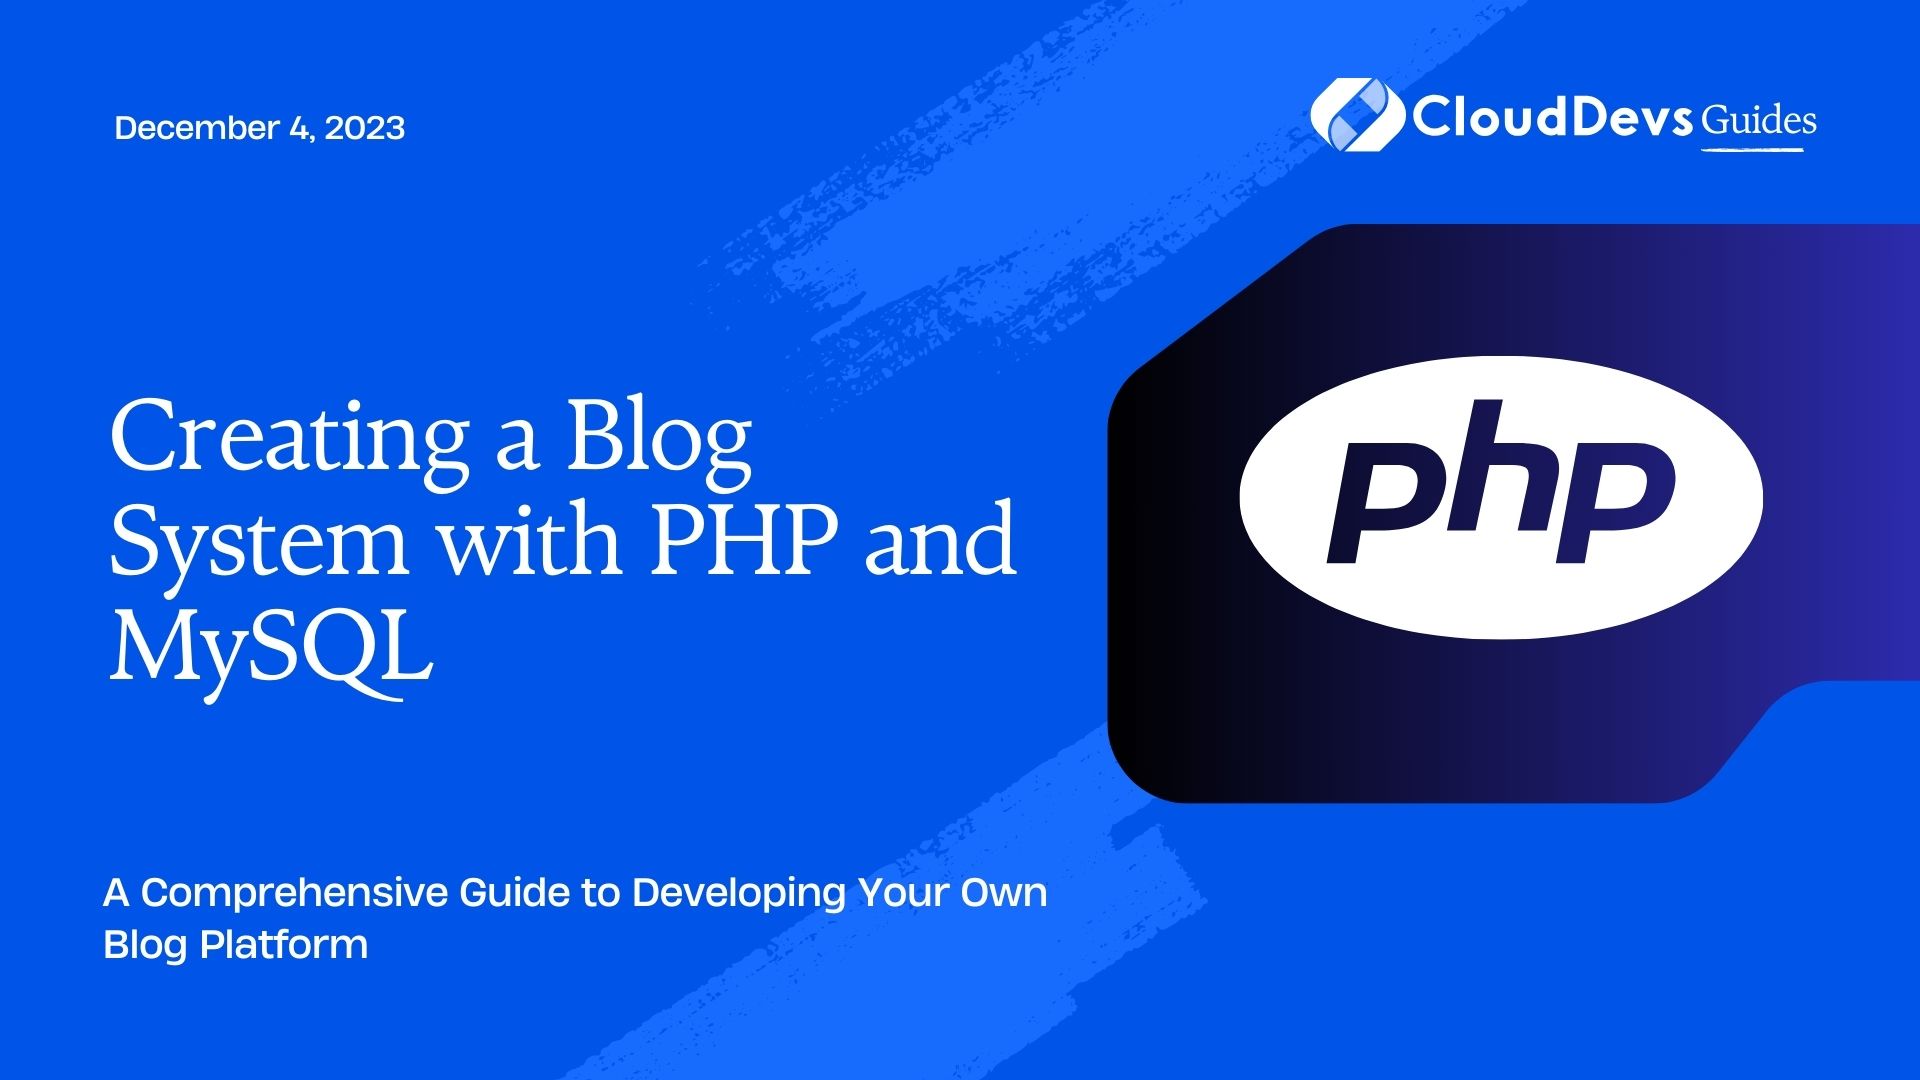 Creating a Blog System with PHP and MySQL